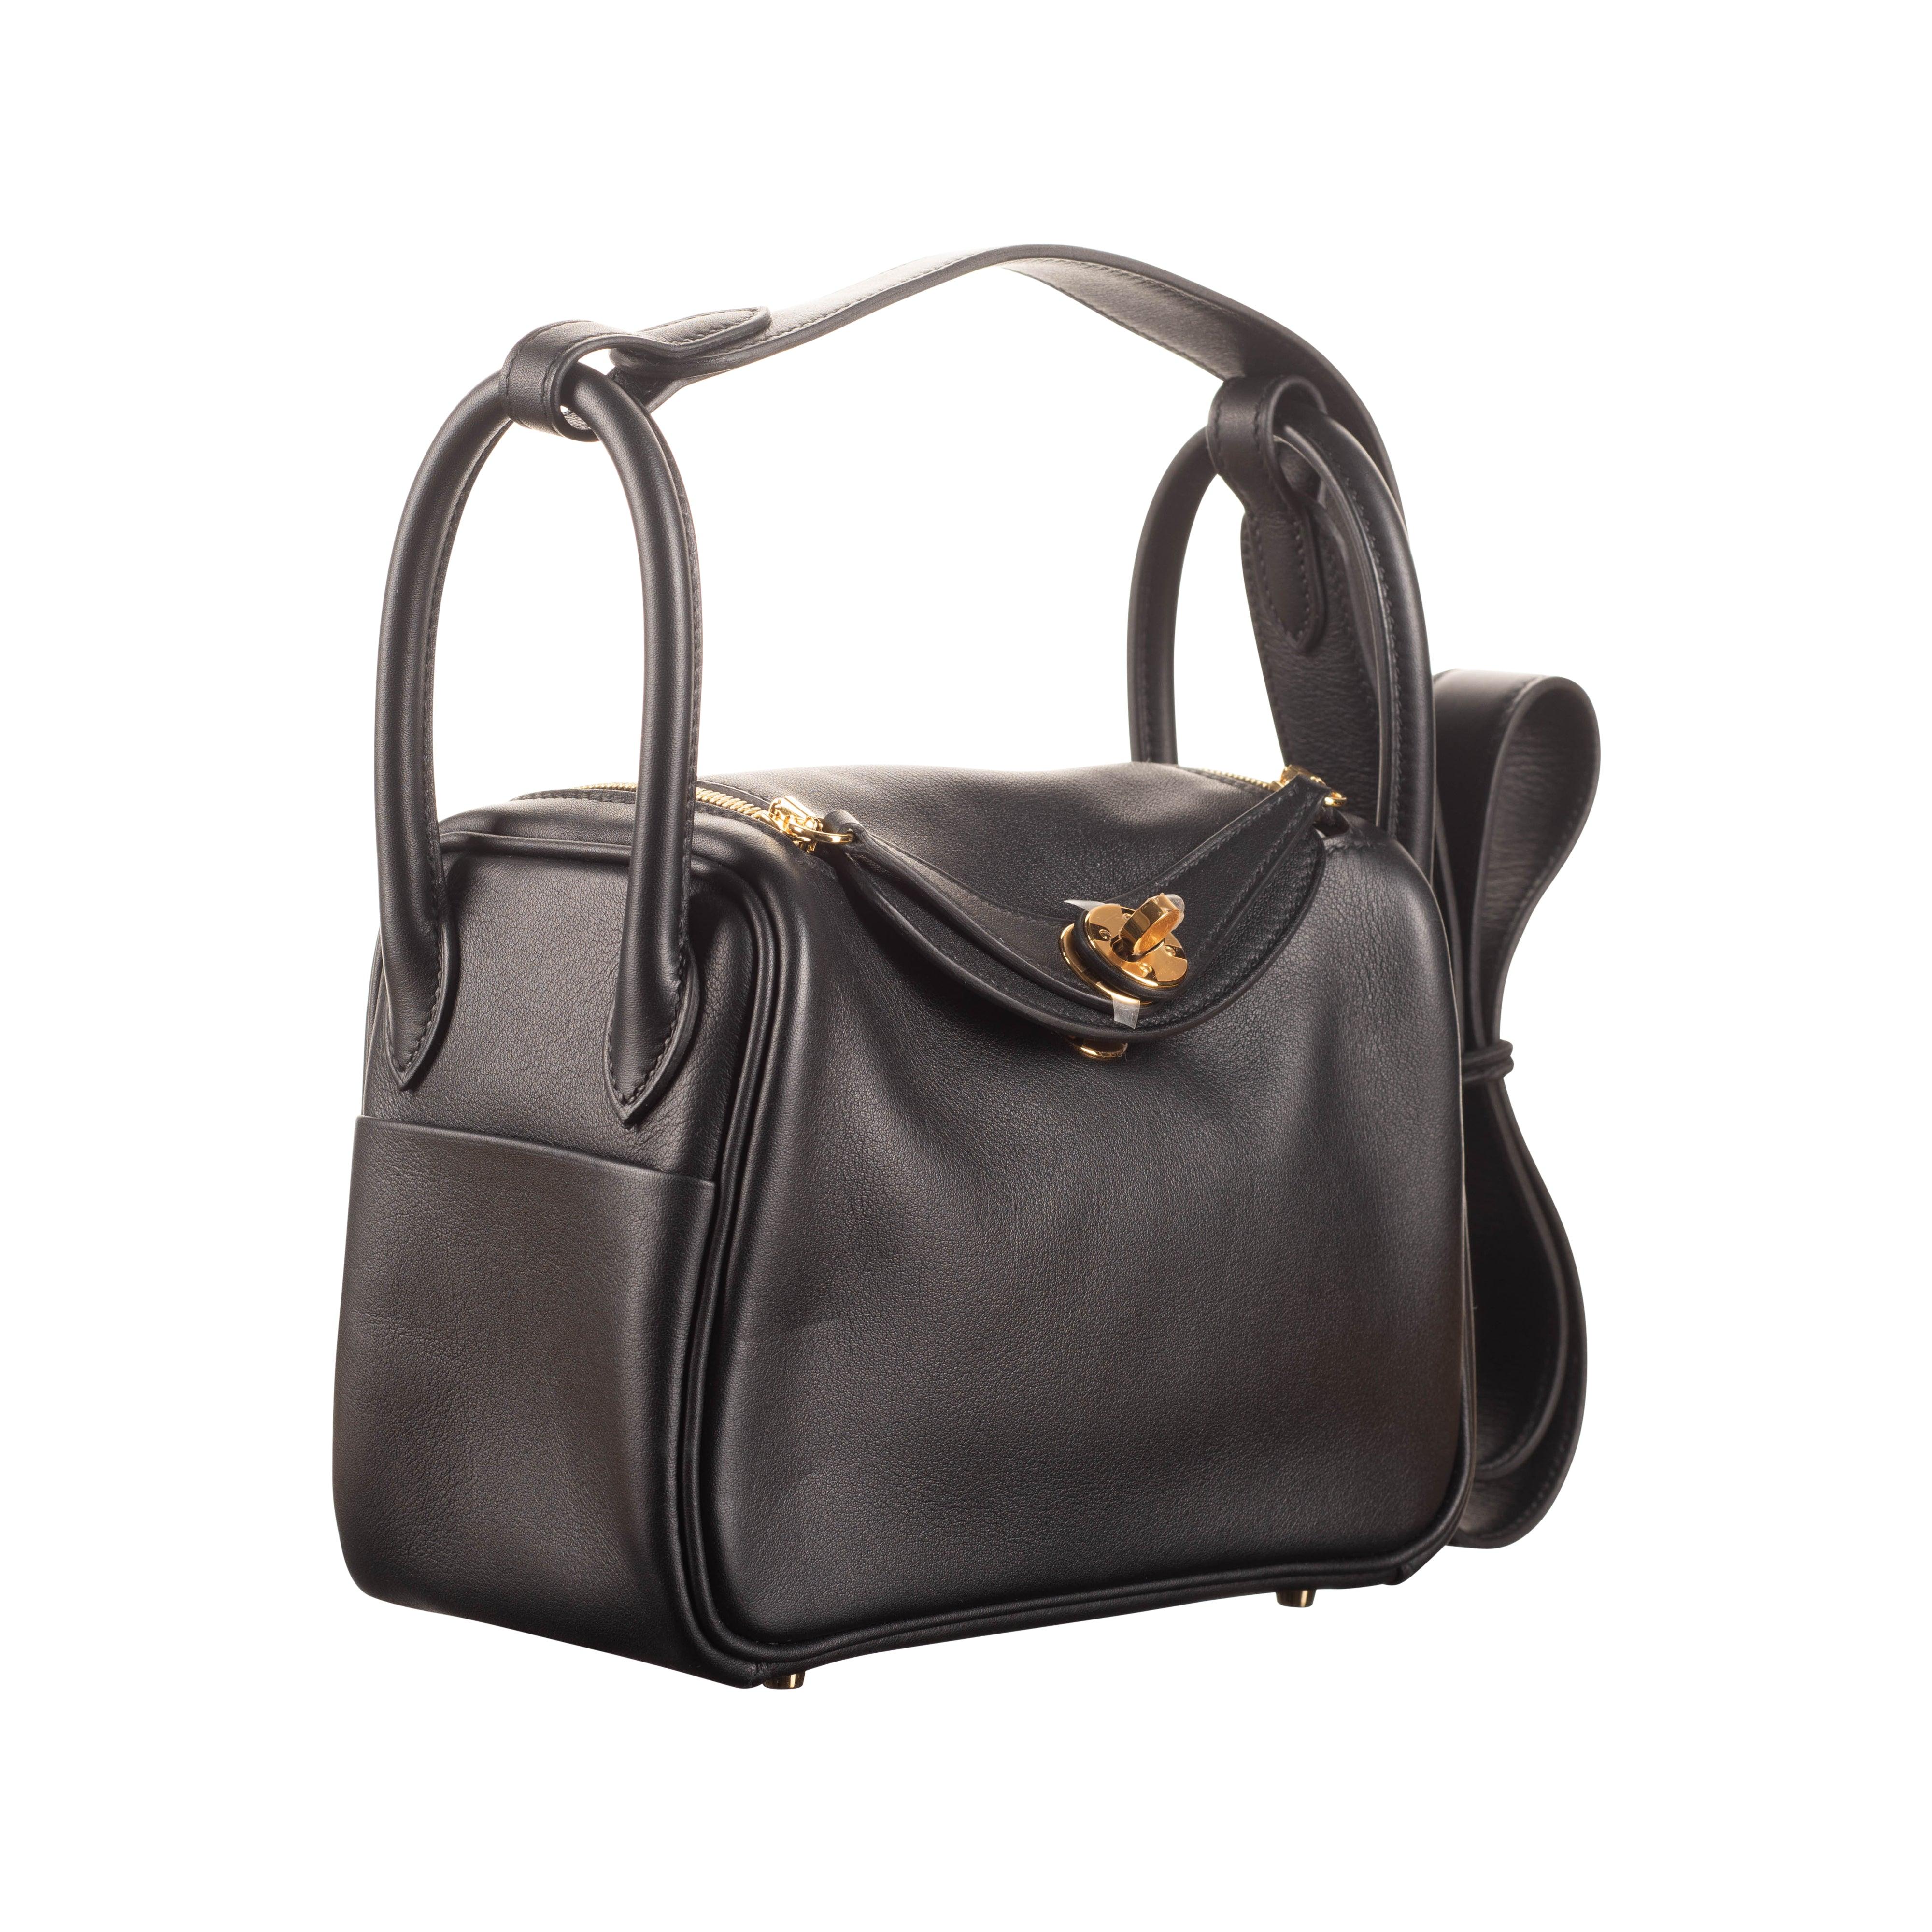 Brand: Hermès
Style: Lindy
Size: 20cm
Color: Black
Material: Swift Leather Hardware Gold (GHW)
Dimensions: 7.5